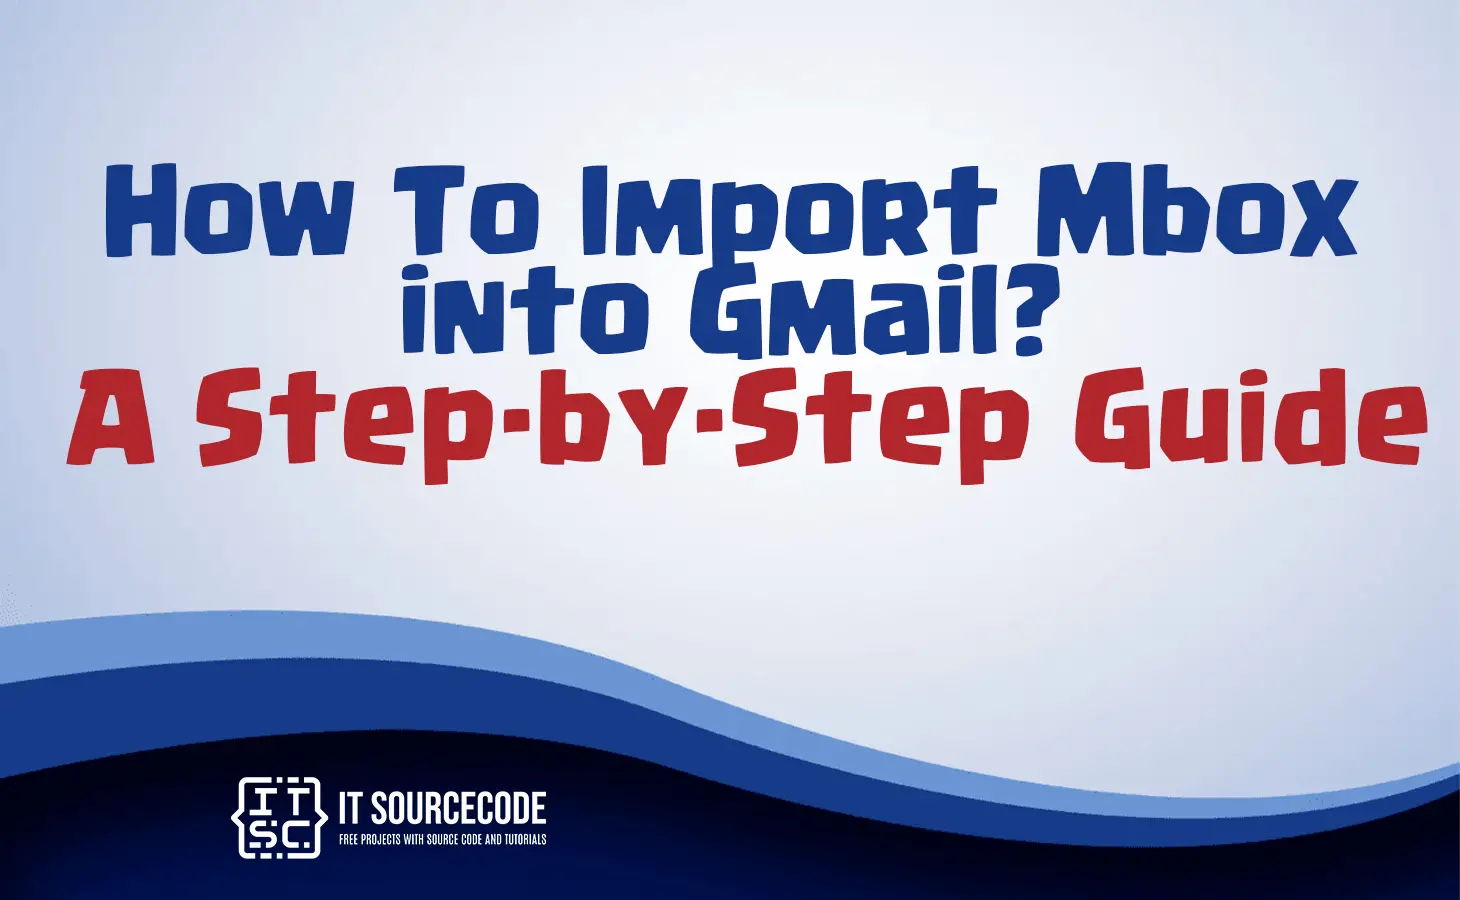 how to import mbox into gmail? a step by step guide